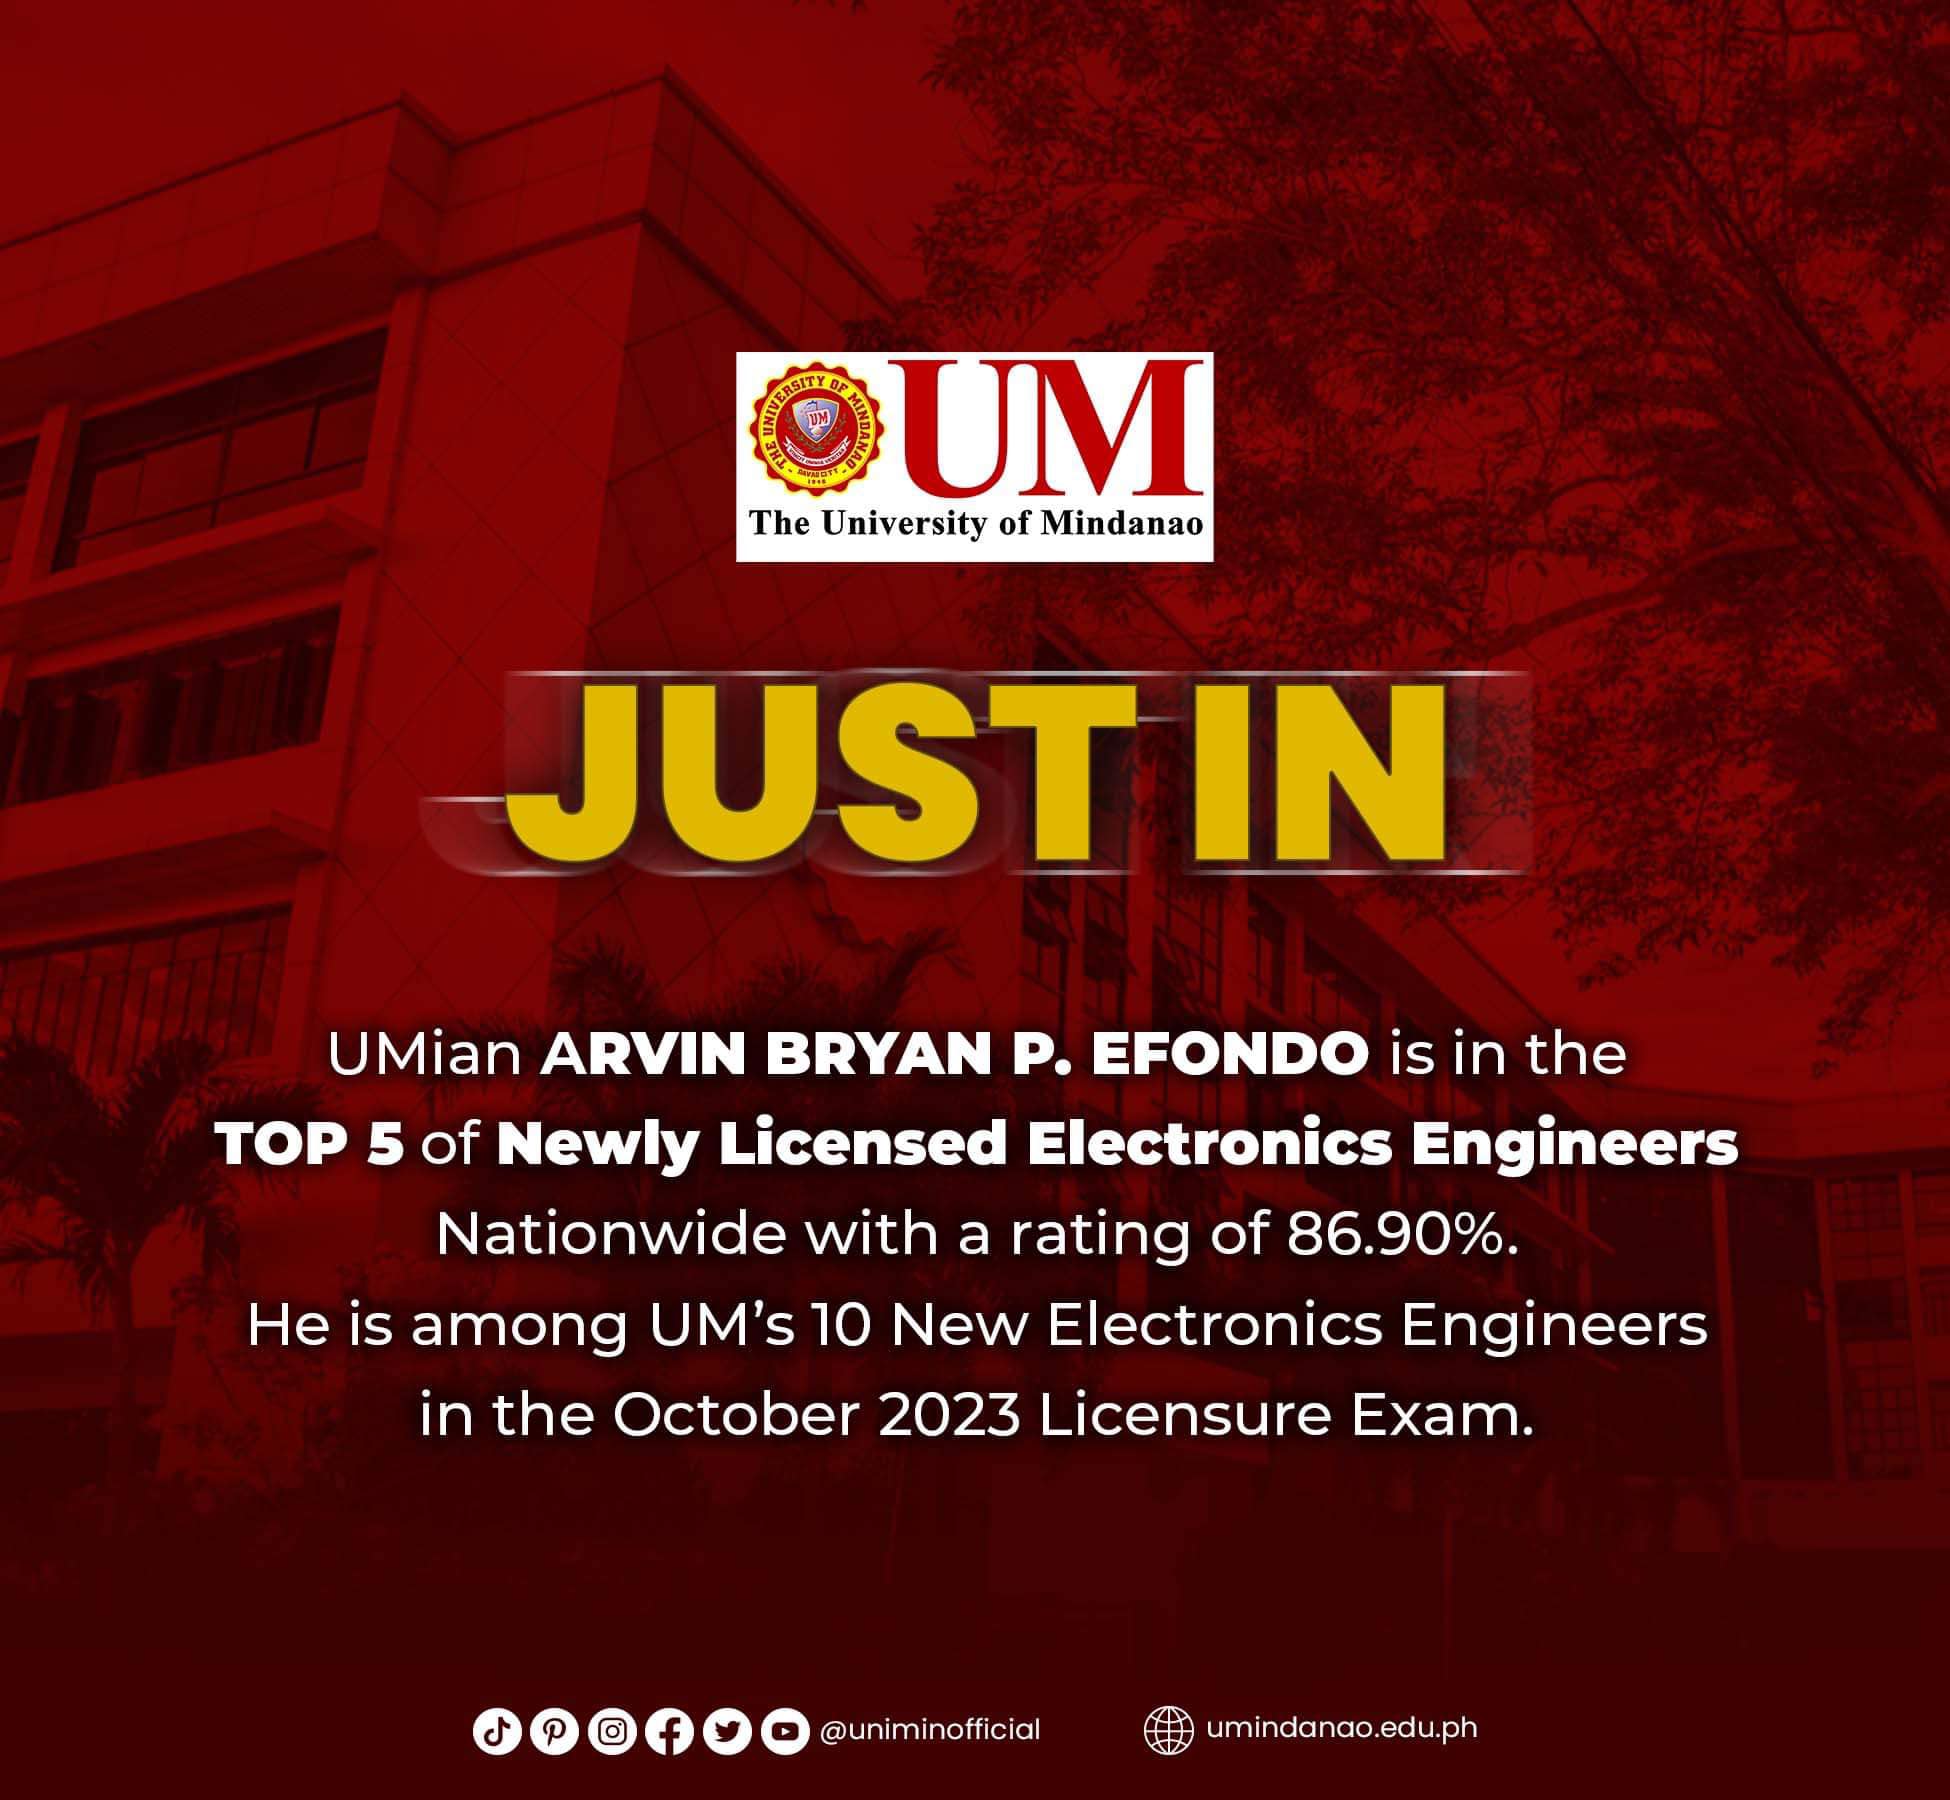 UM posts 5th placer in Electronics Engineer licensure examination